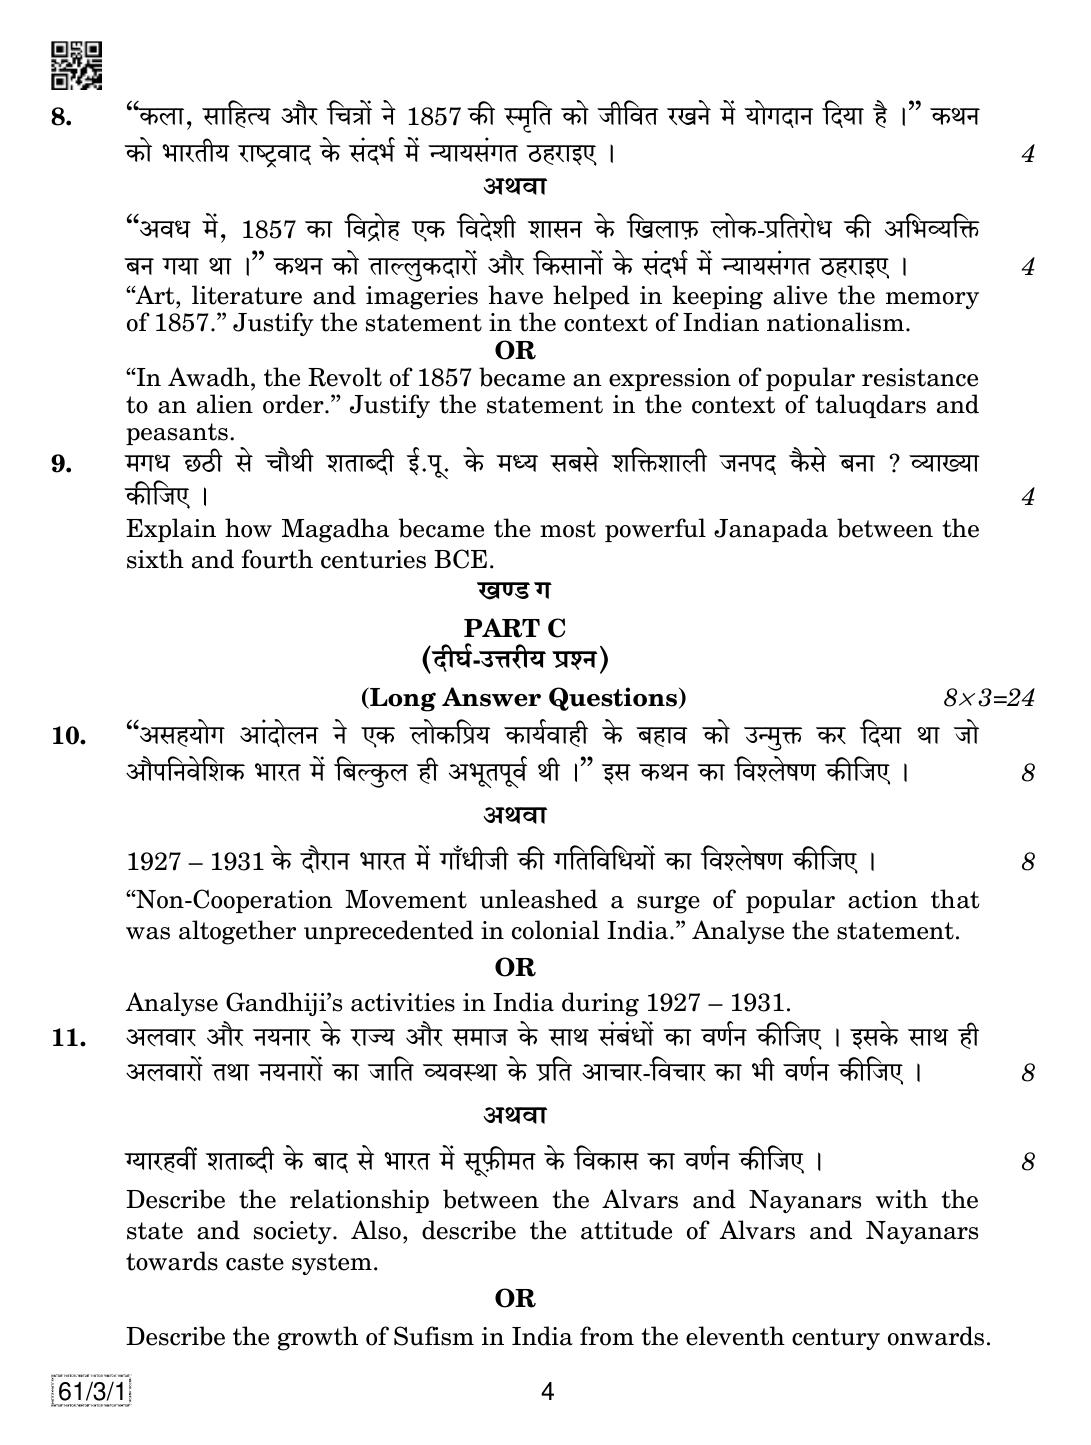 CBSE Class 12 61-3-1 History 2019 Question Paper - Page 4